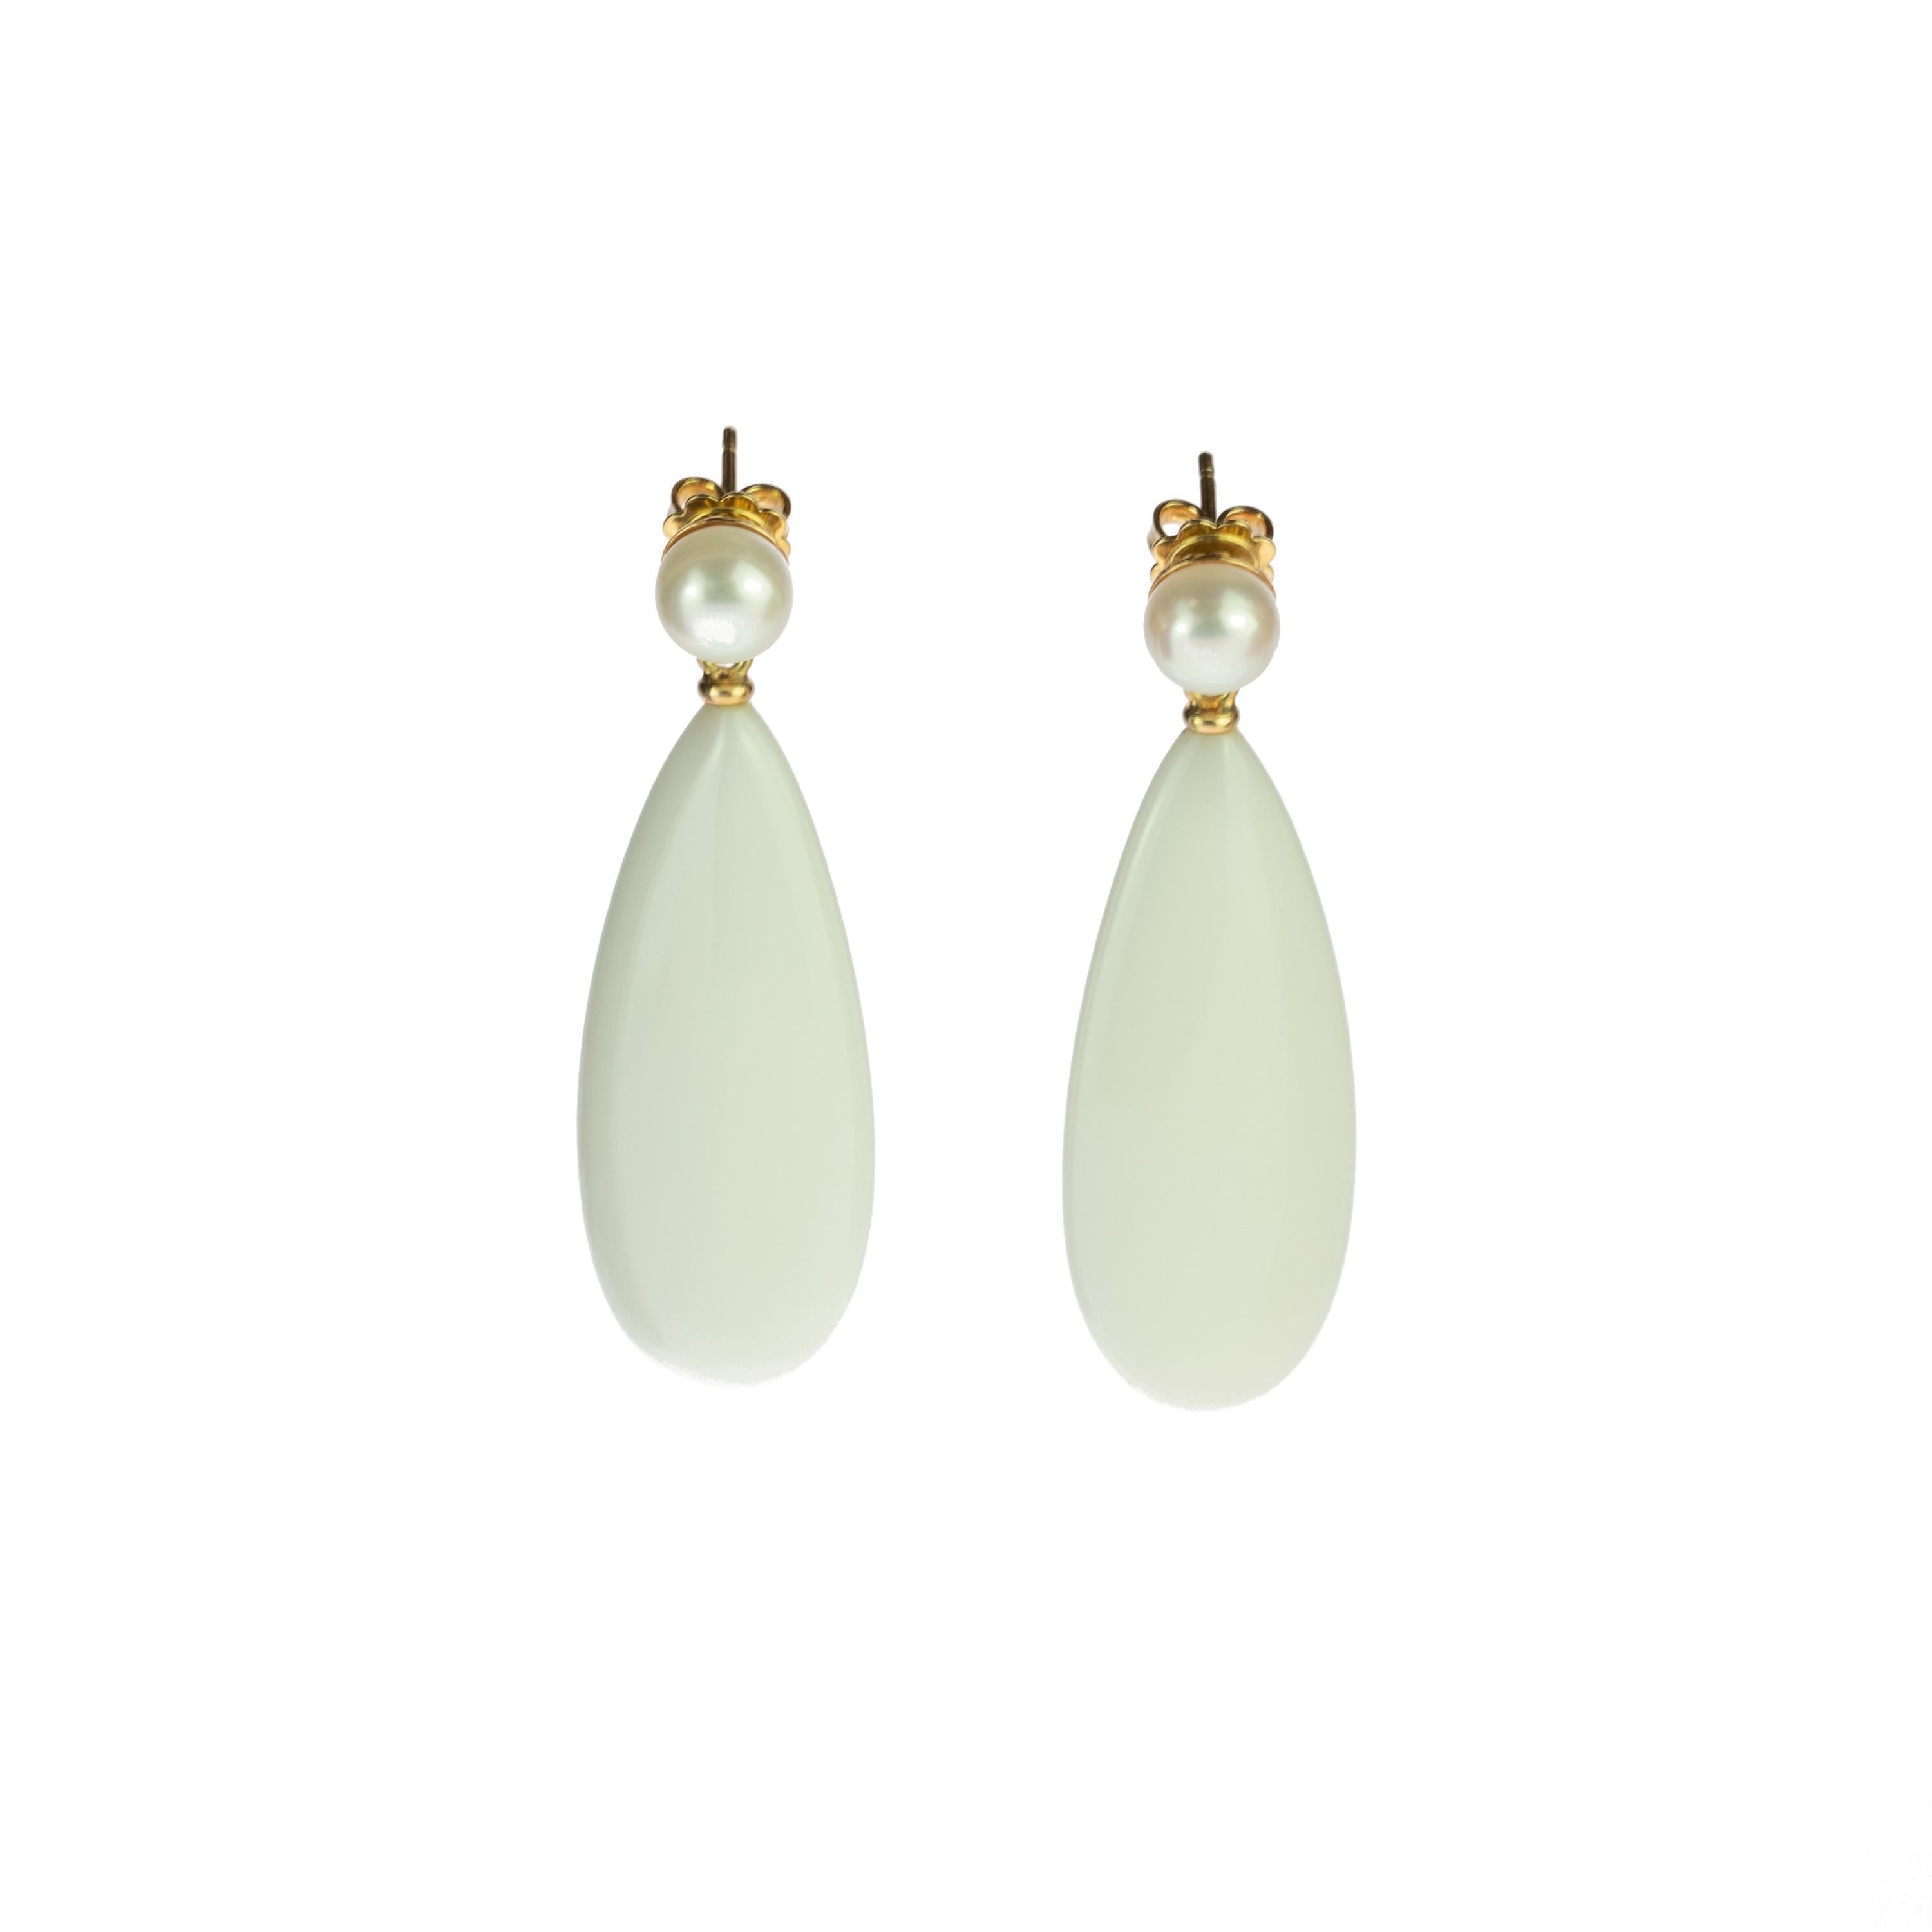 Crafted earrings of freshwater pearls with a stunning white agate pear tear drop design that combine geometric round shapes with a matte white color. Resulting in flat, free-spirited pieces with a charming elegance. Held by 18 karat yellow gold that